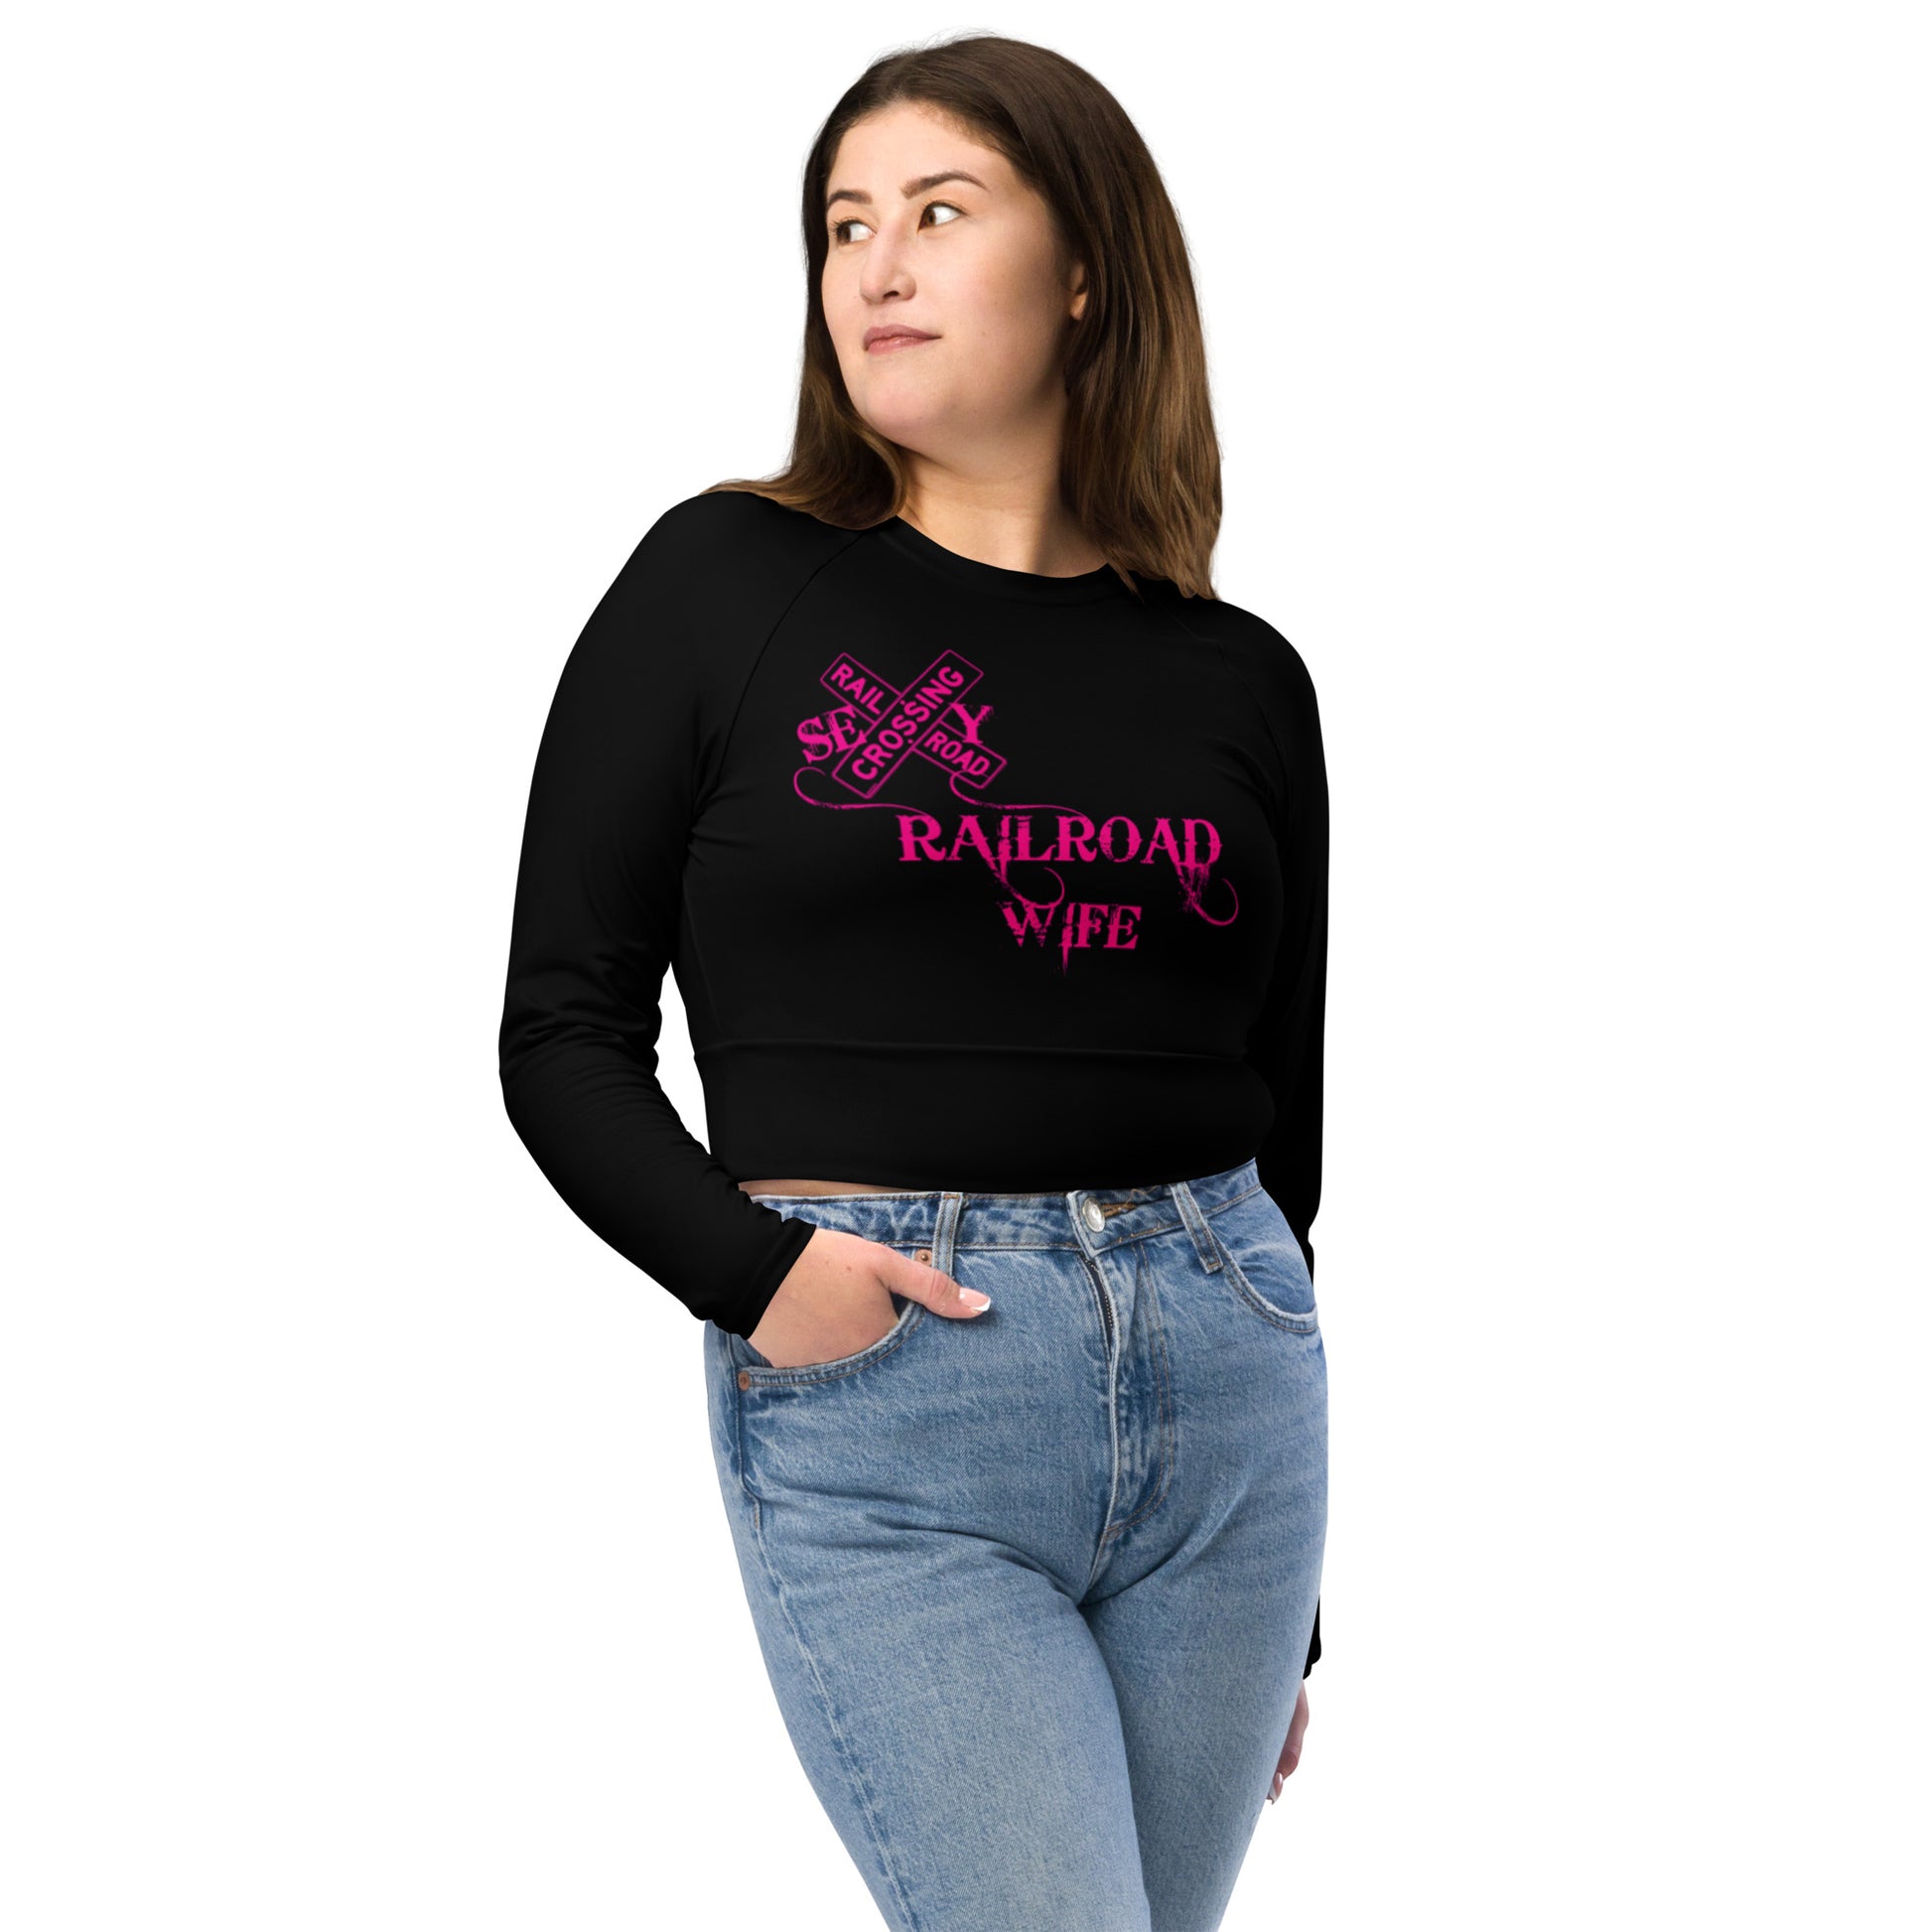 Sexy Railroad Wife Recycled long-sleeve crop top - Broken Knuckle Apparel